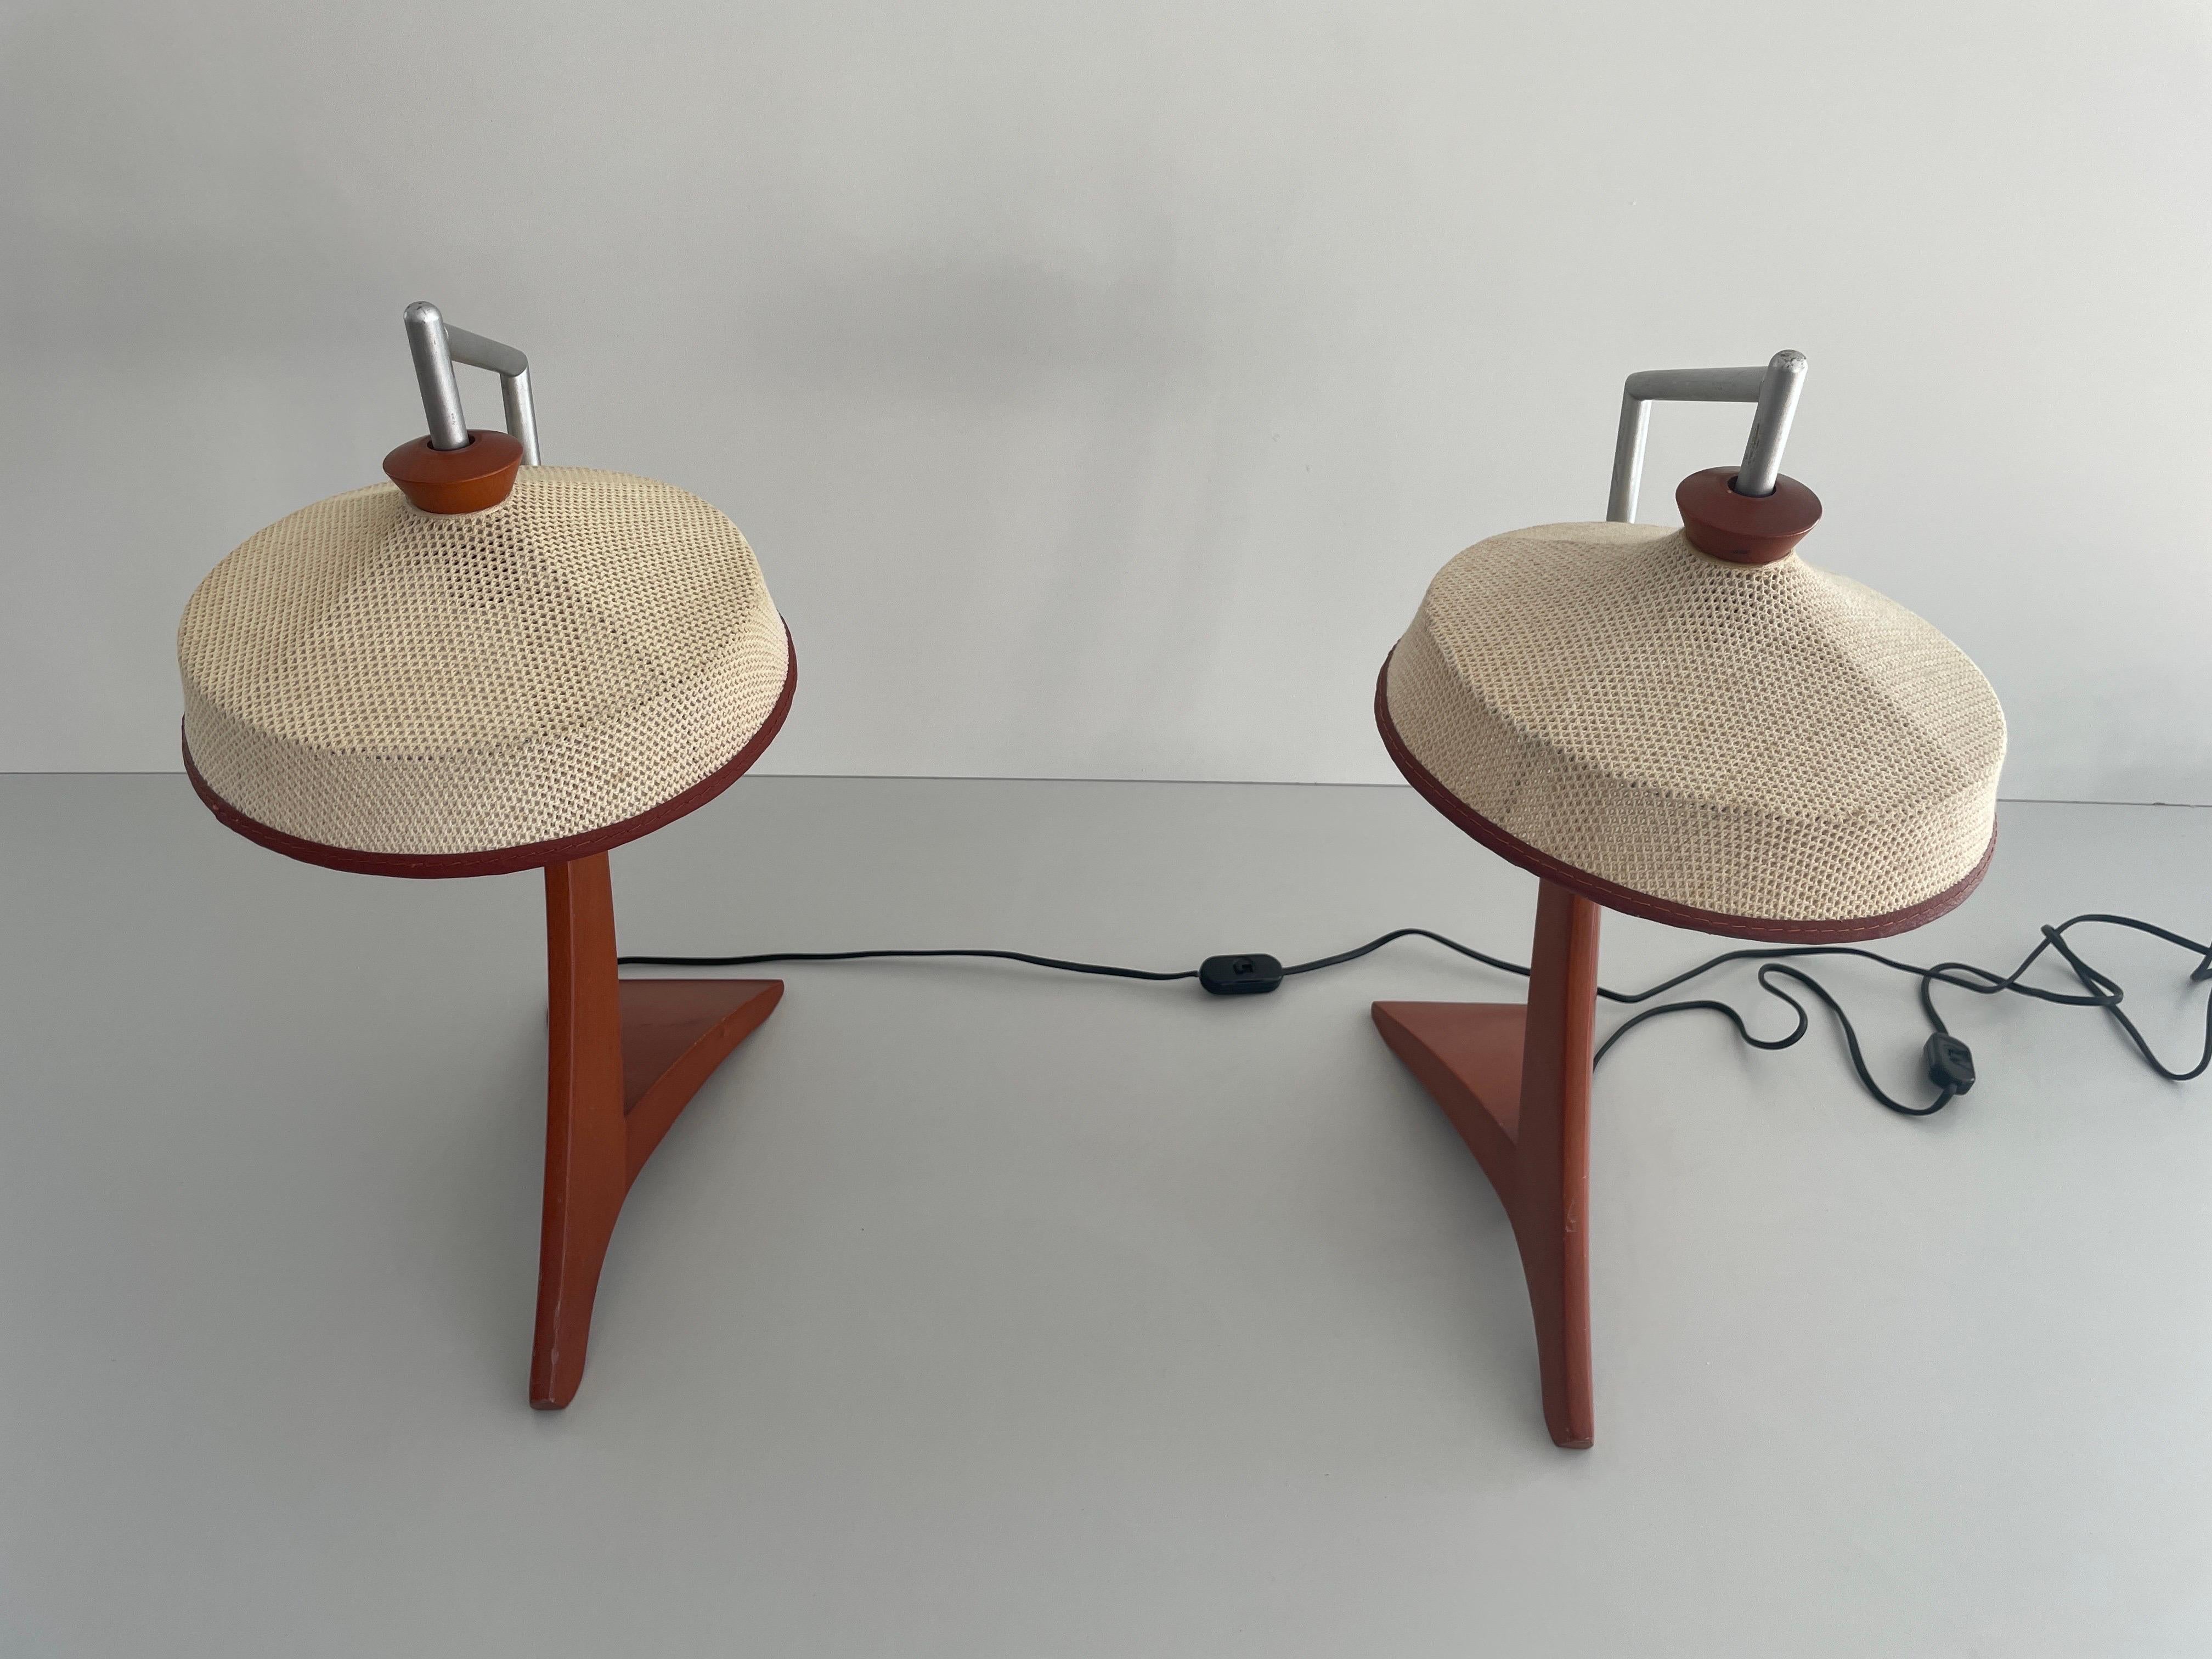 Italian  Wood and Woven Thread Shade Pair of Tall Table Lamps, 1960s, Italy